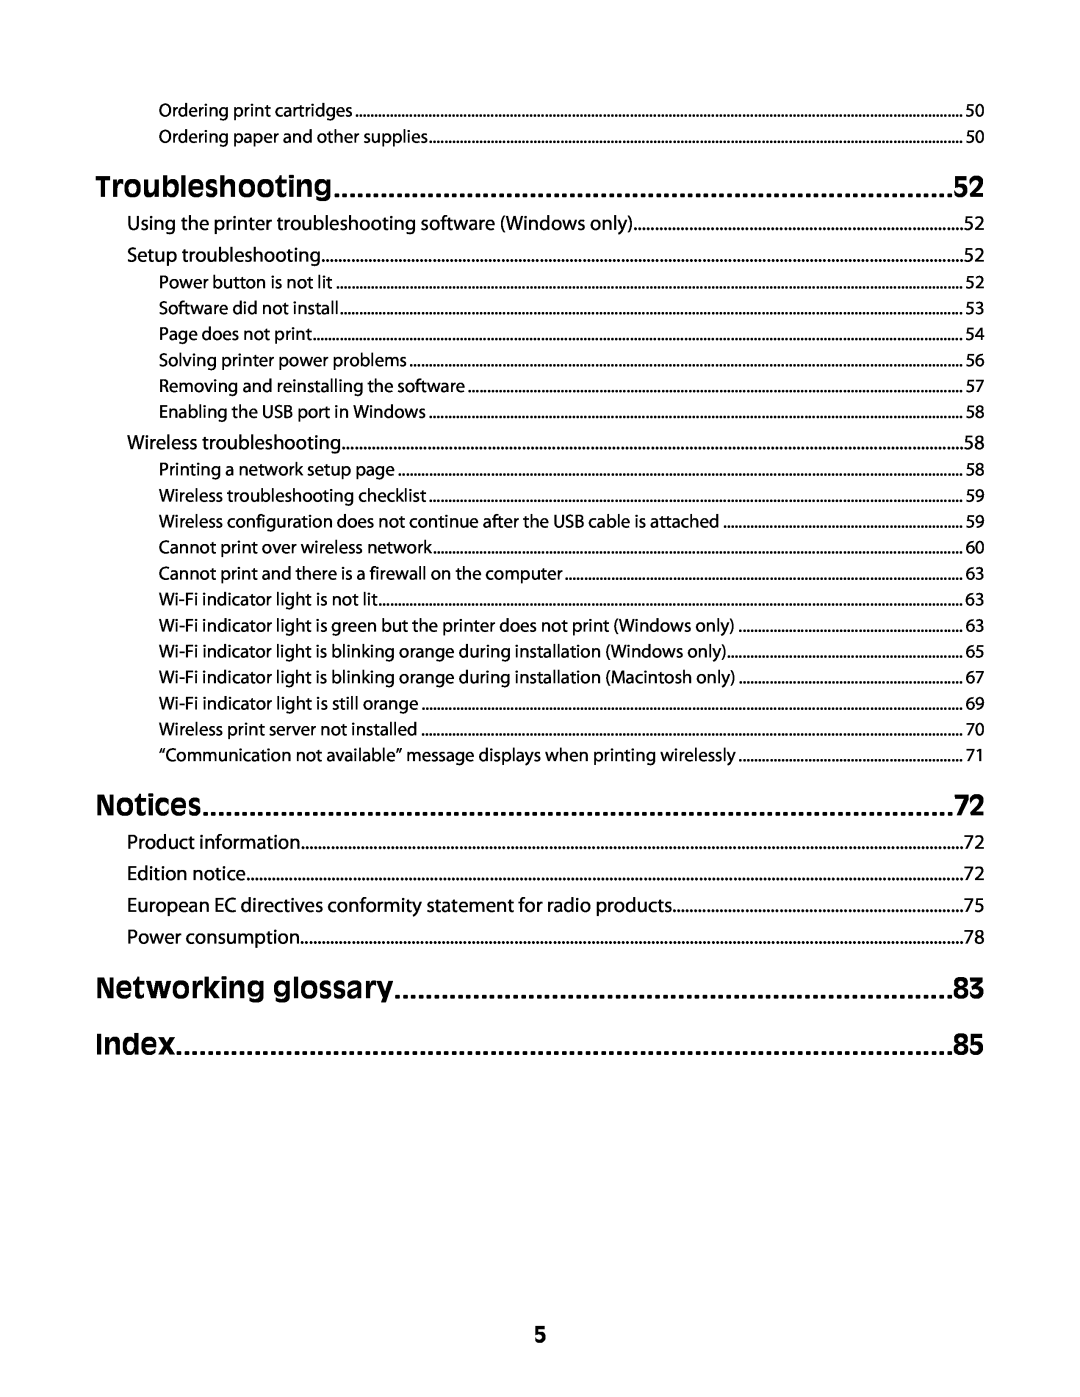 Lexmark Z2400 Series manual Troubleshooting, Networking glossary, Notices, Index 